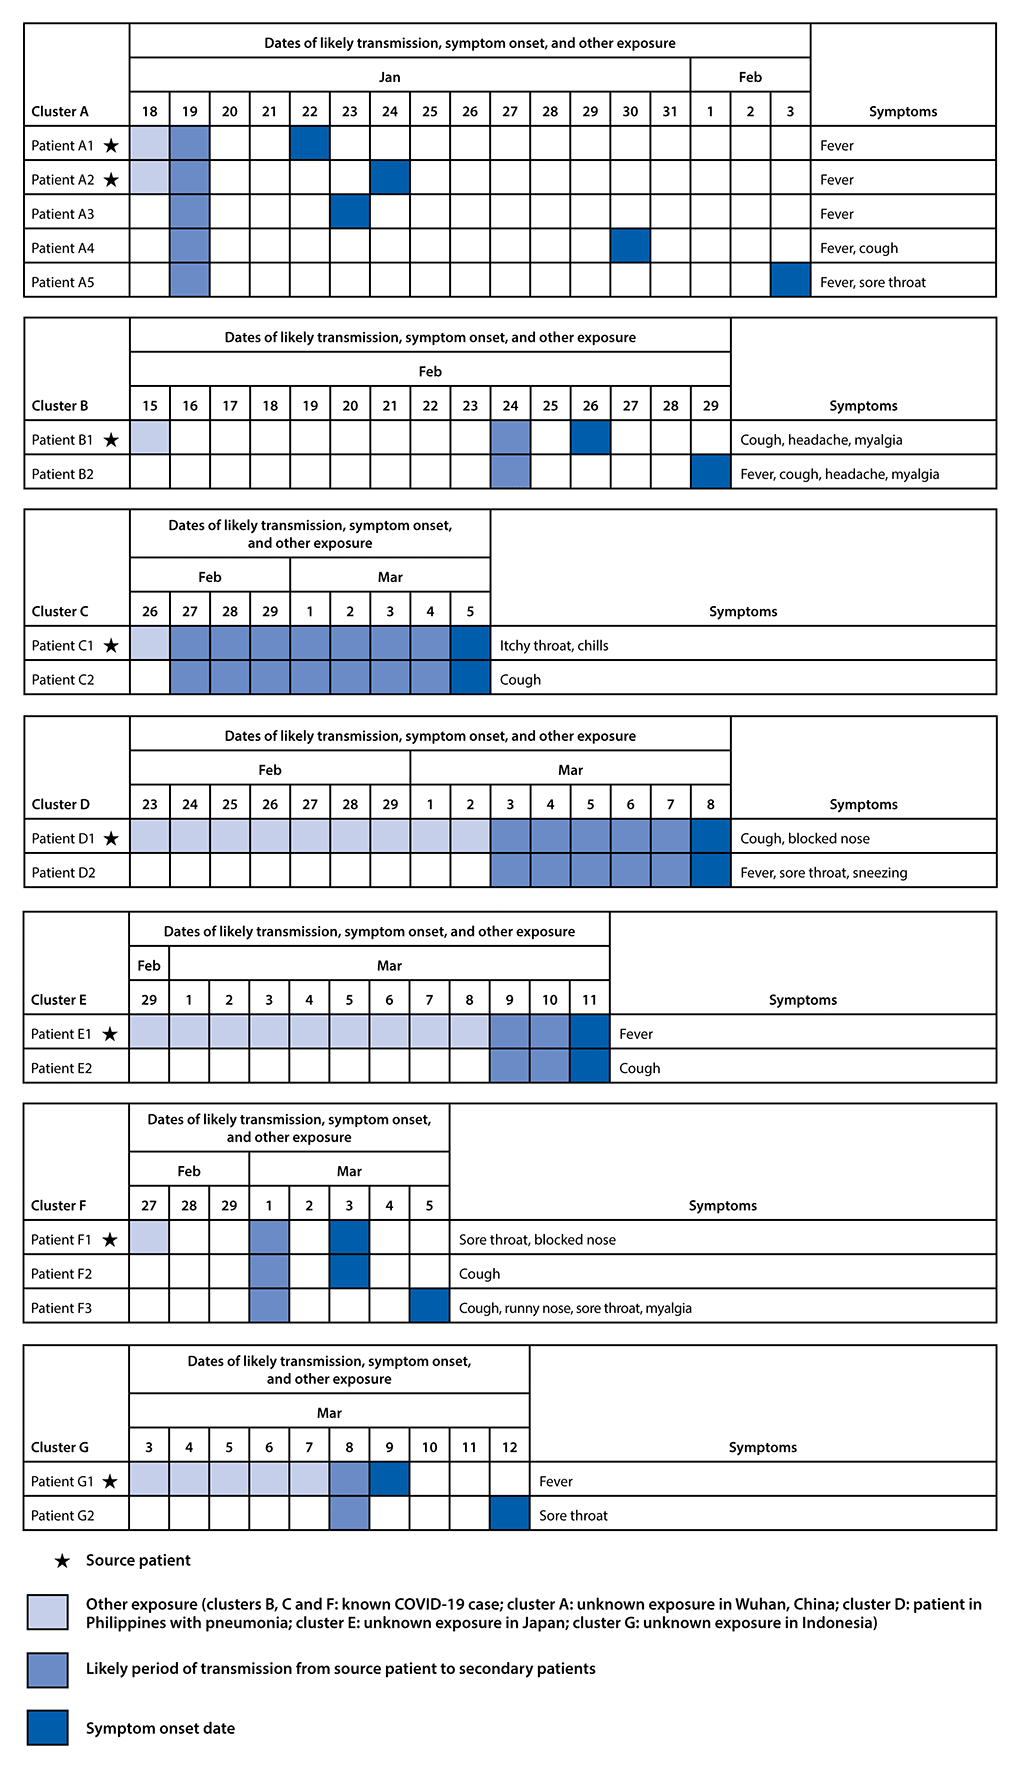 The figure is a box graph illustrating seven COVID-19 clusters with evidence of likely presymptomatic SARS-CoV-2 transmission from source patients to secondary patients, by exposure, symptom onset date, and likely transmission period, in Singapore during January 19–March 12, 2020.